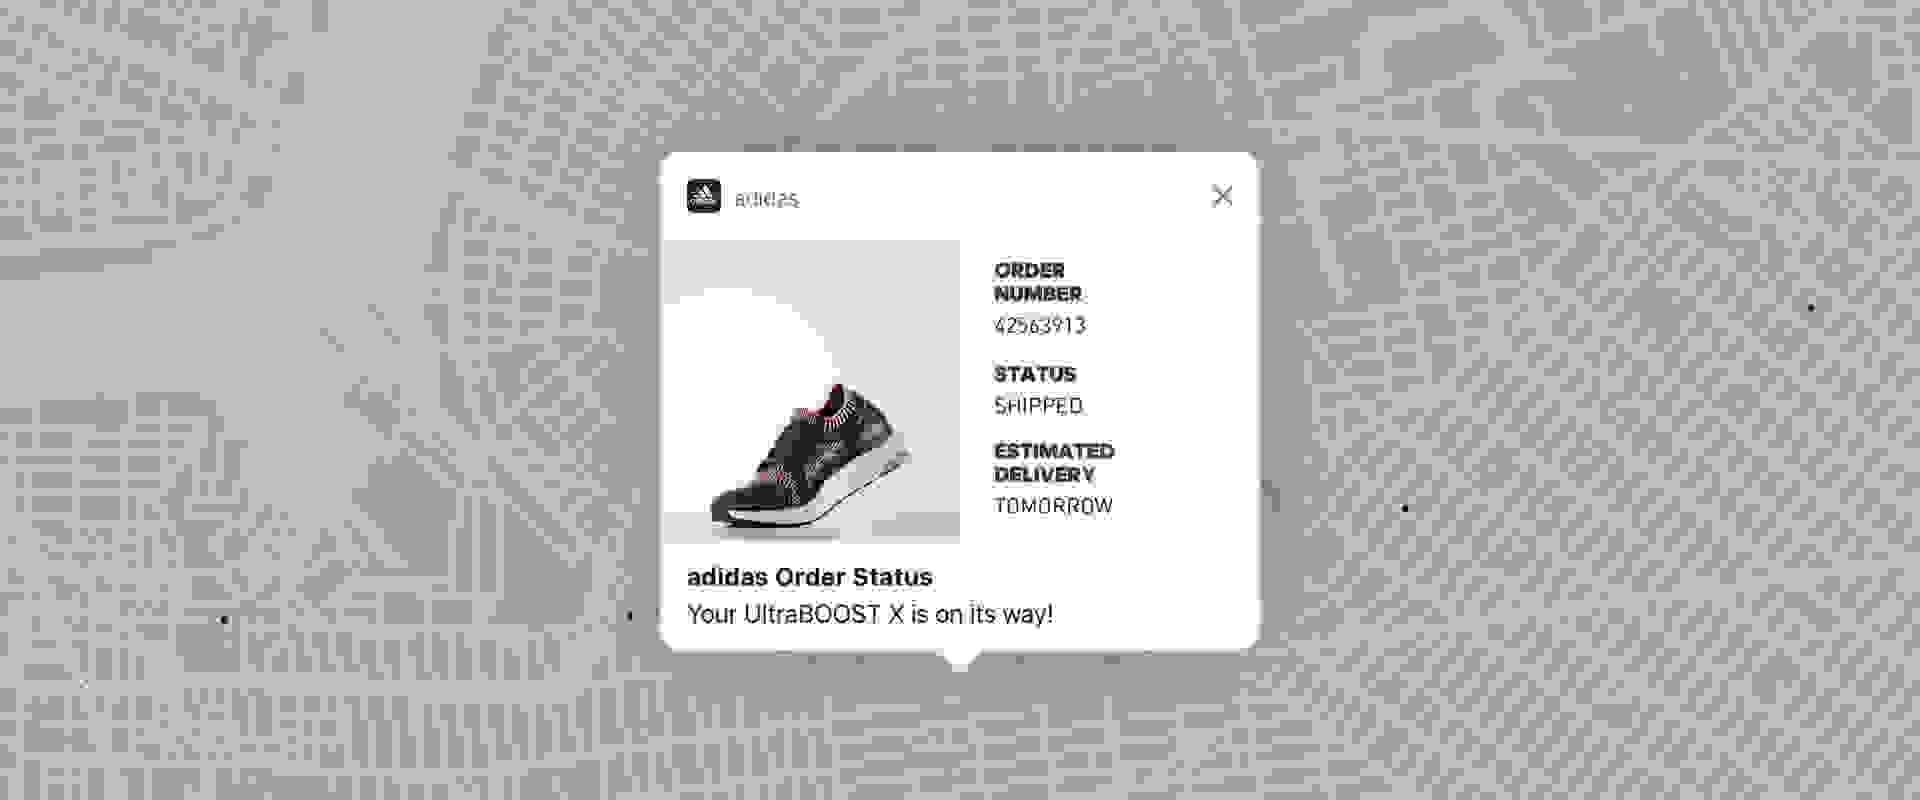 Learn about the adidas apps. adidas.com